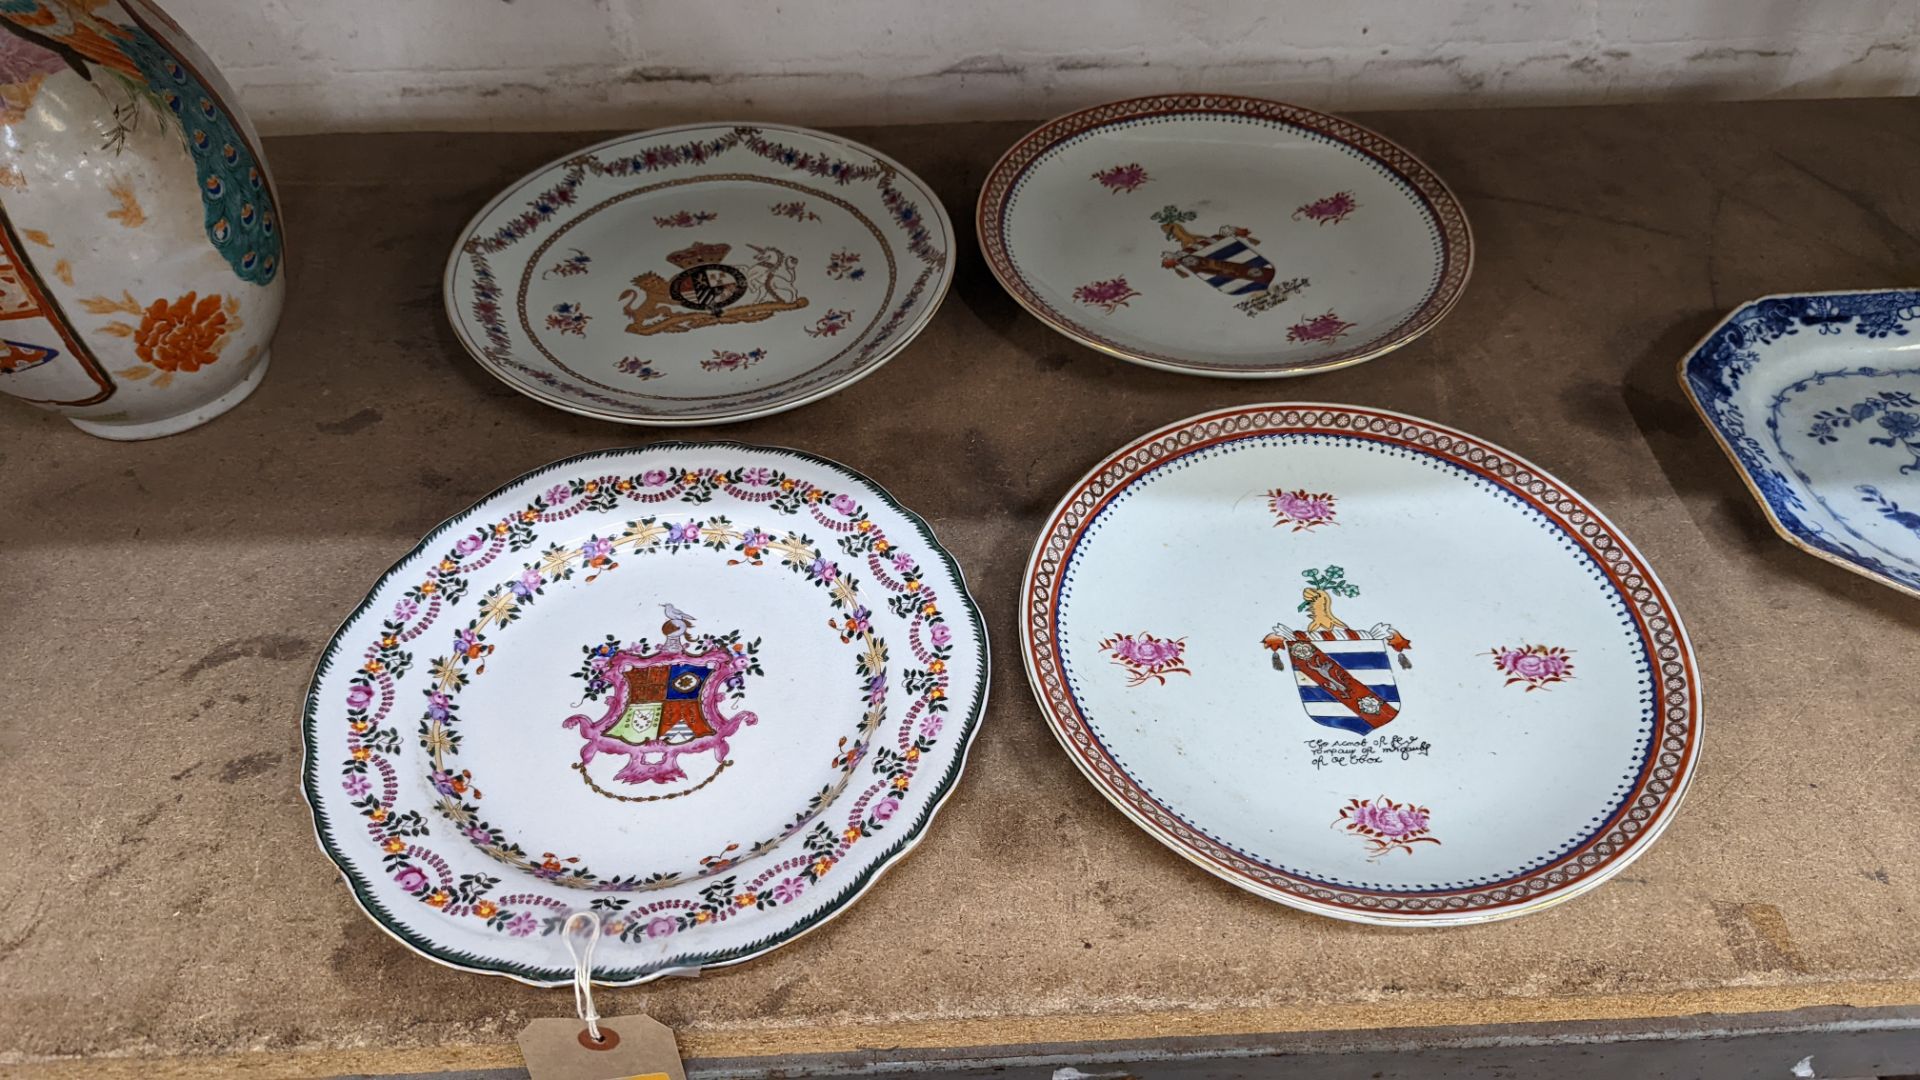 4 off modern Chinese plates, export style - Image 12 of 12